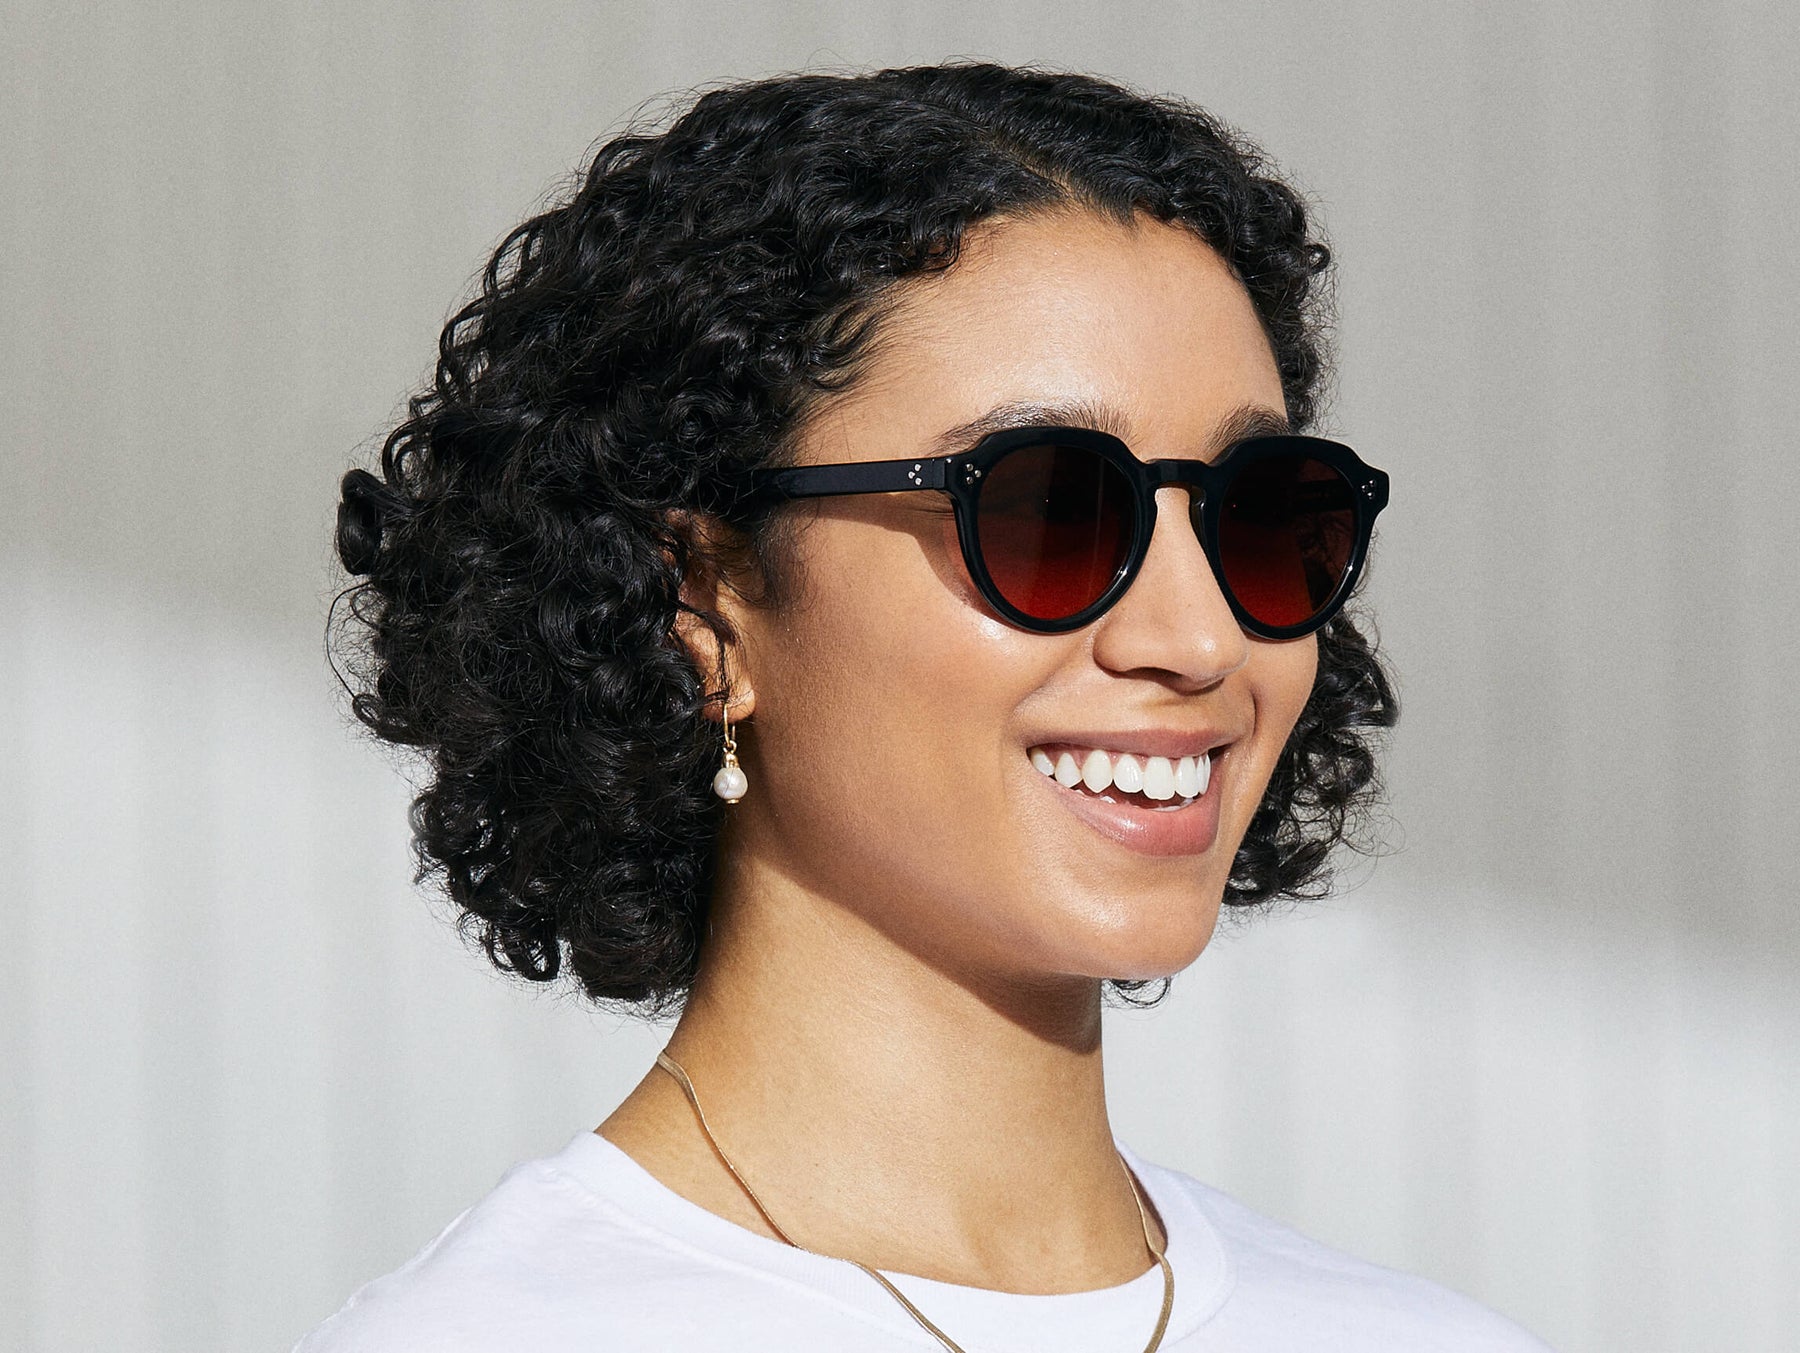 Model is wearing The GAVOLT SUN in Black in size 48 with Cabernet Tinted Lenses